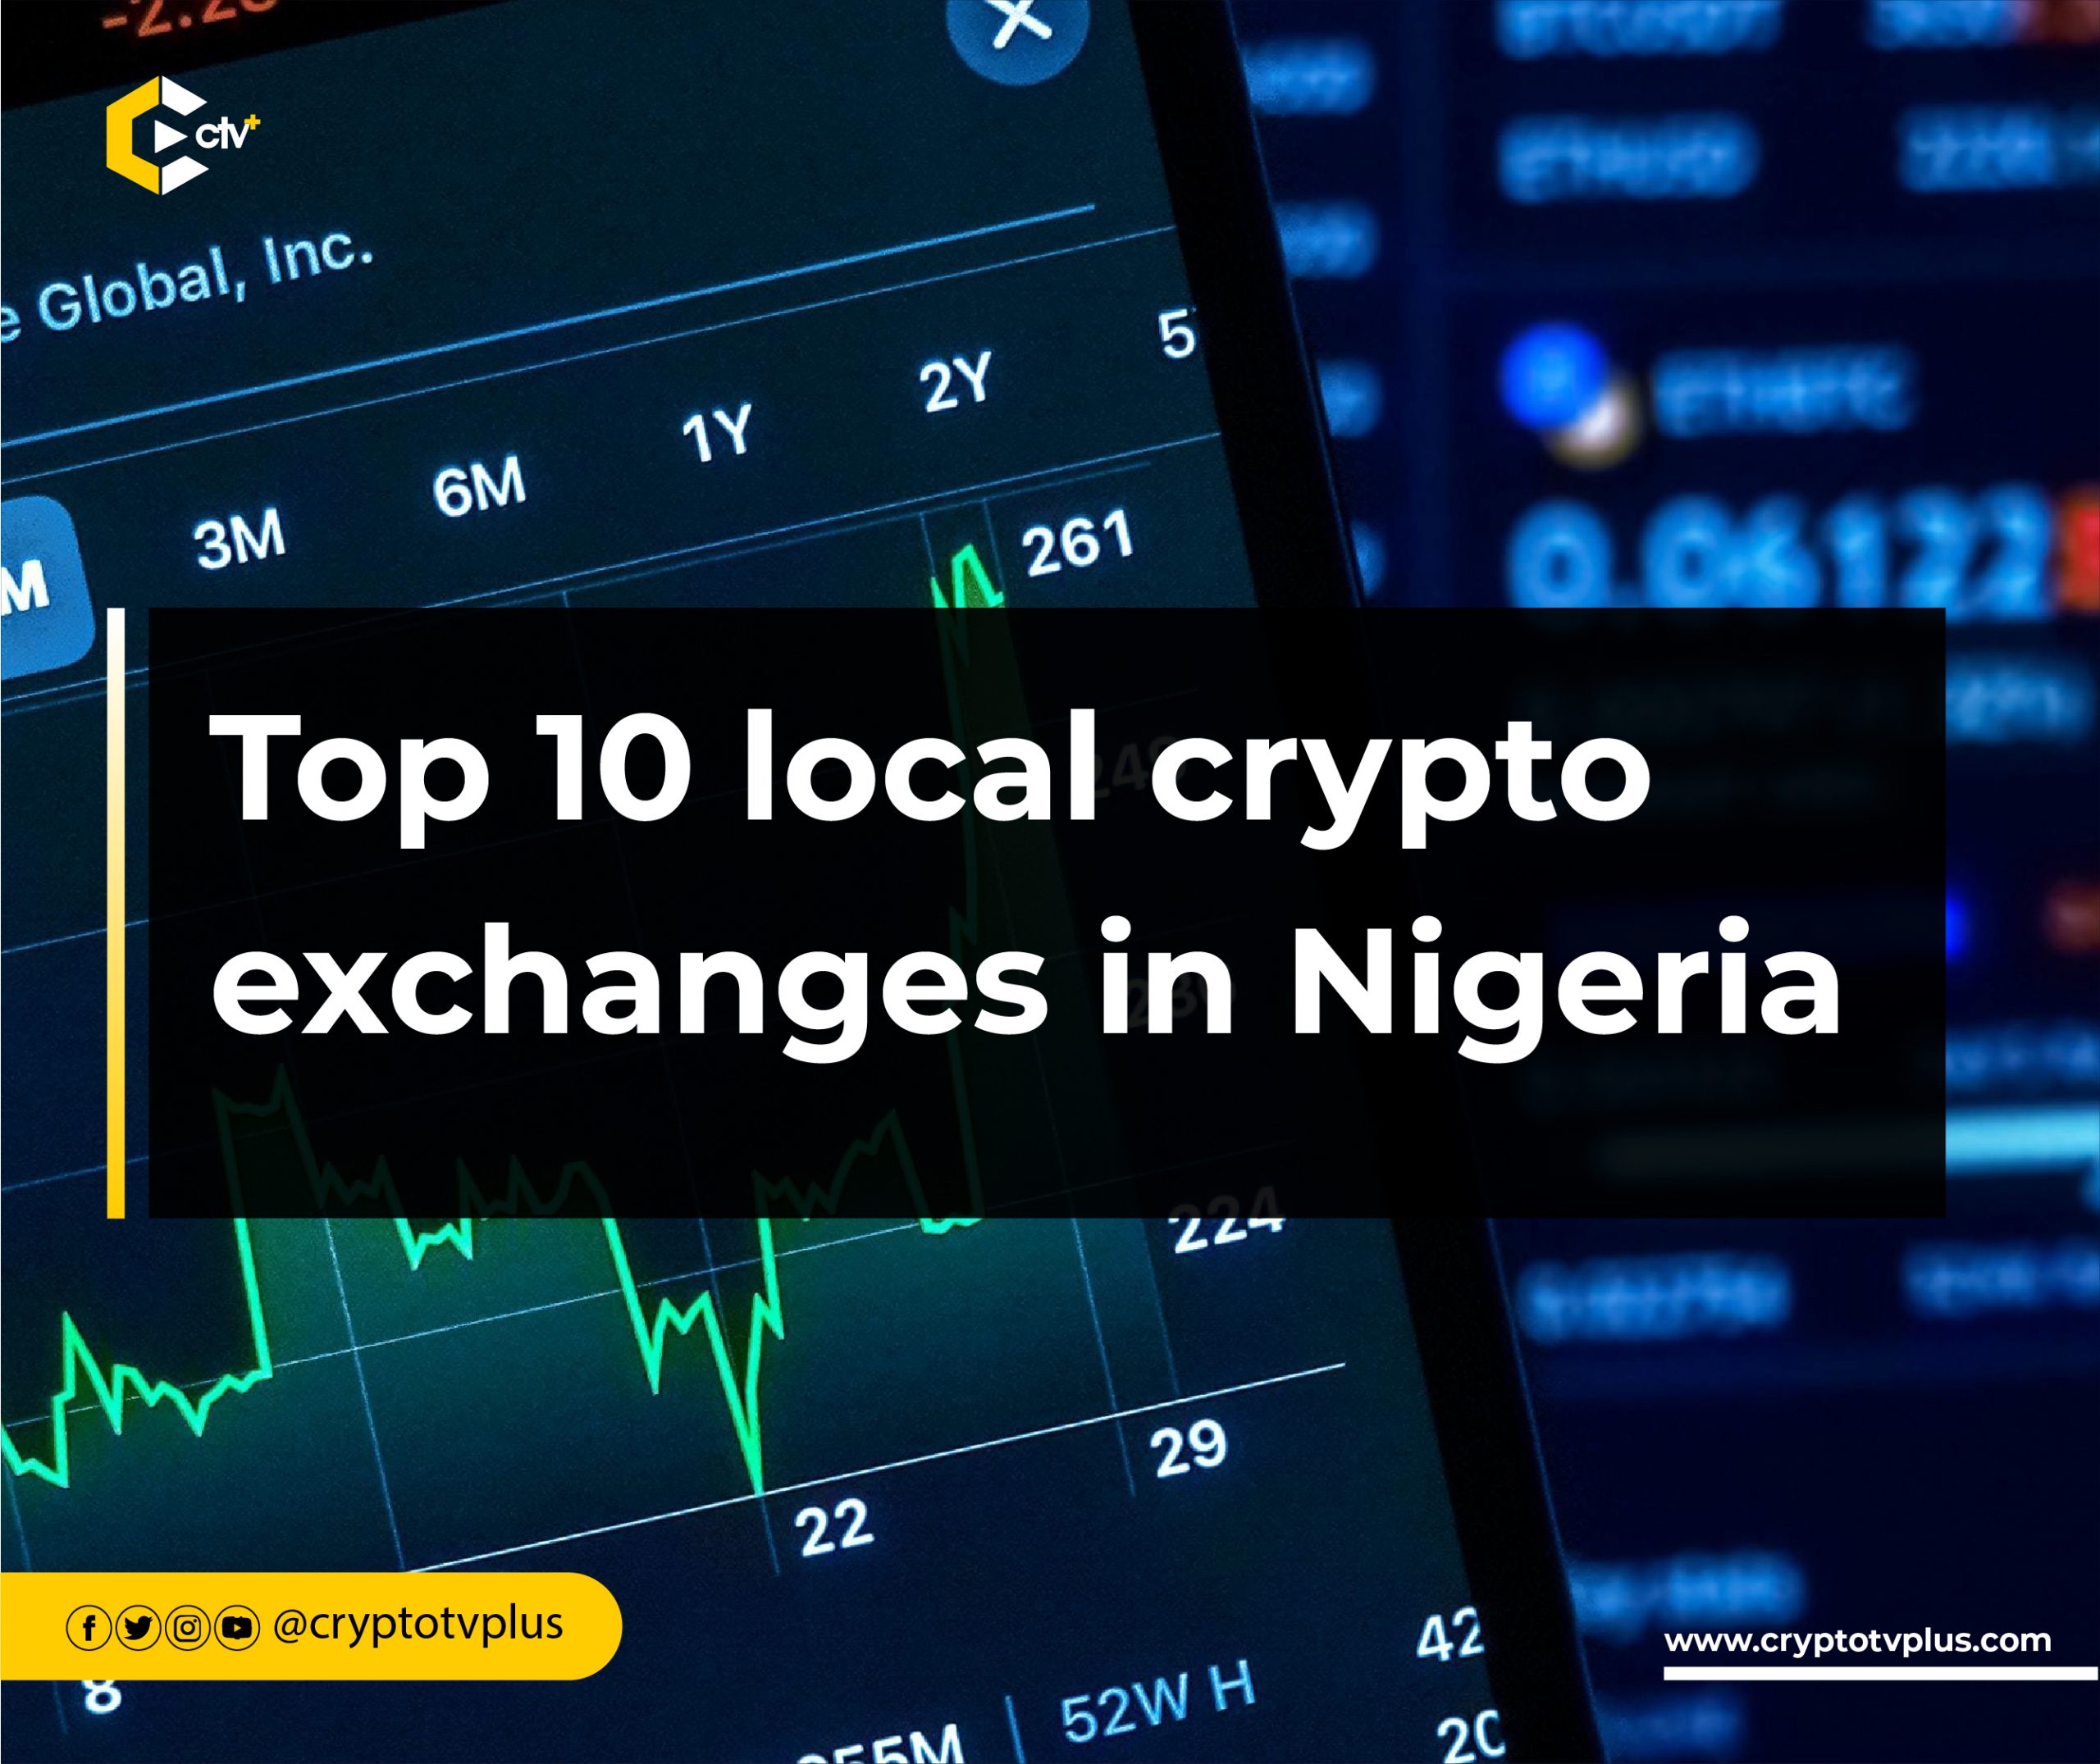 ConsenSys and MoonPay to enable crypto purchases in Nigeria